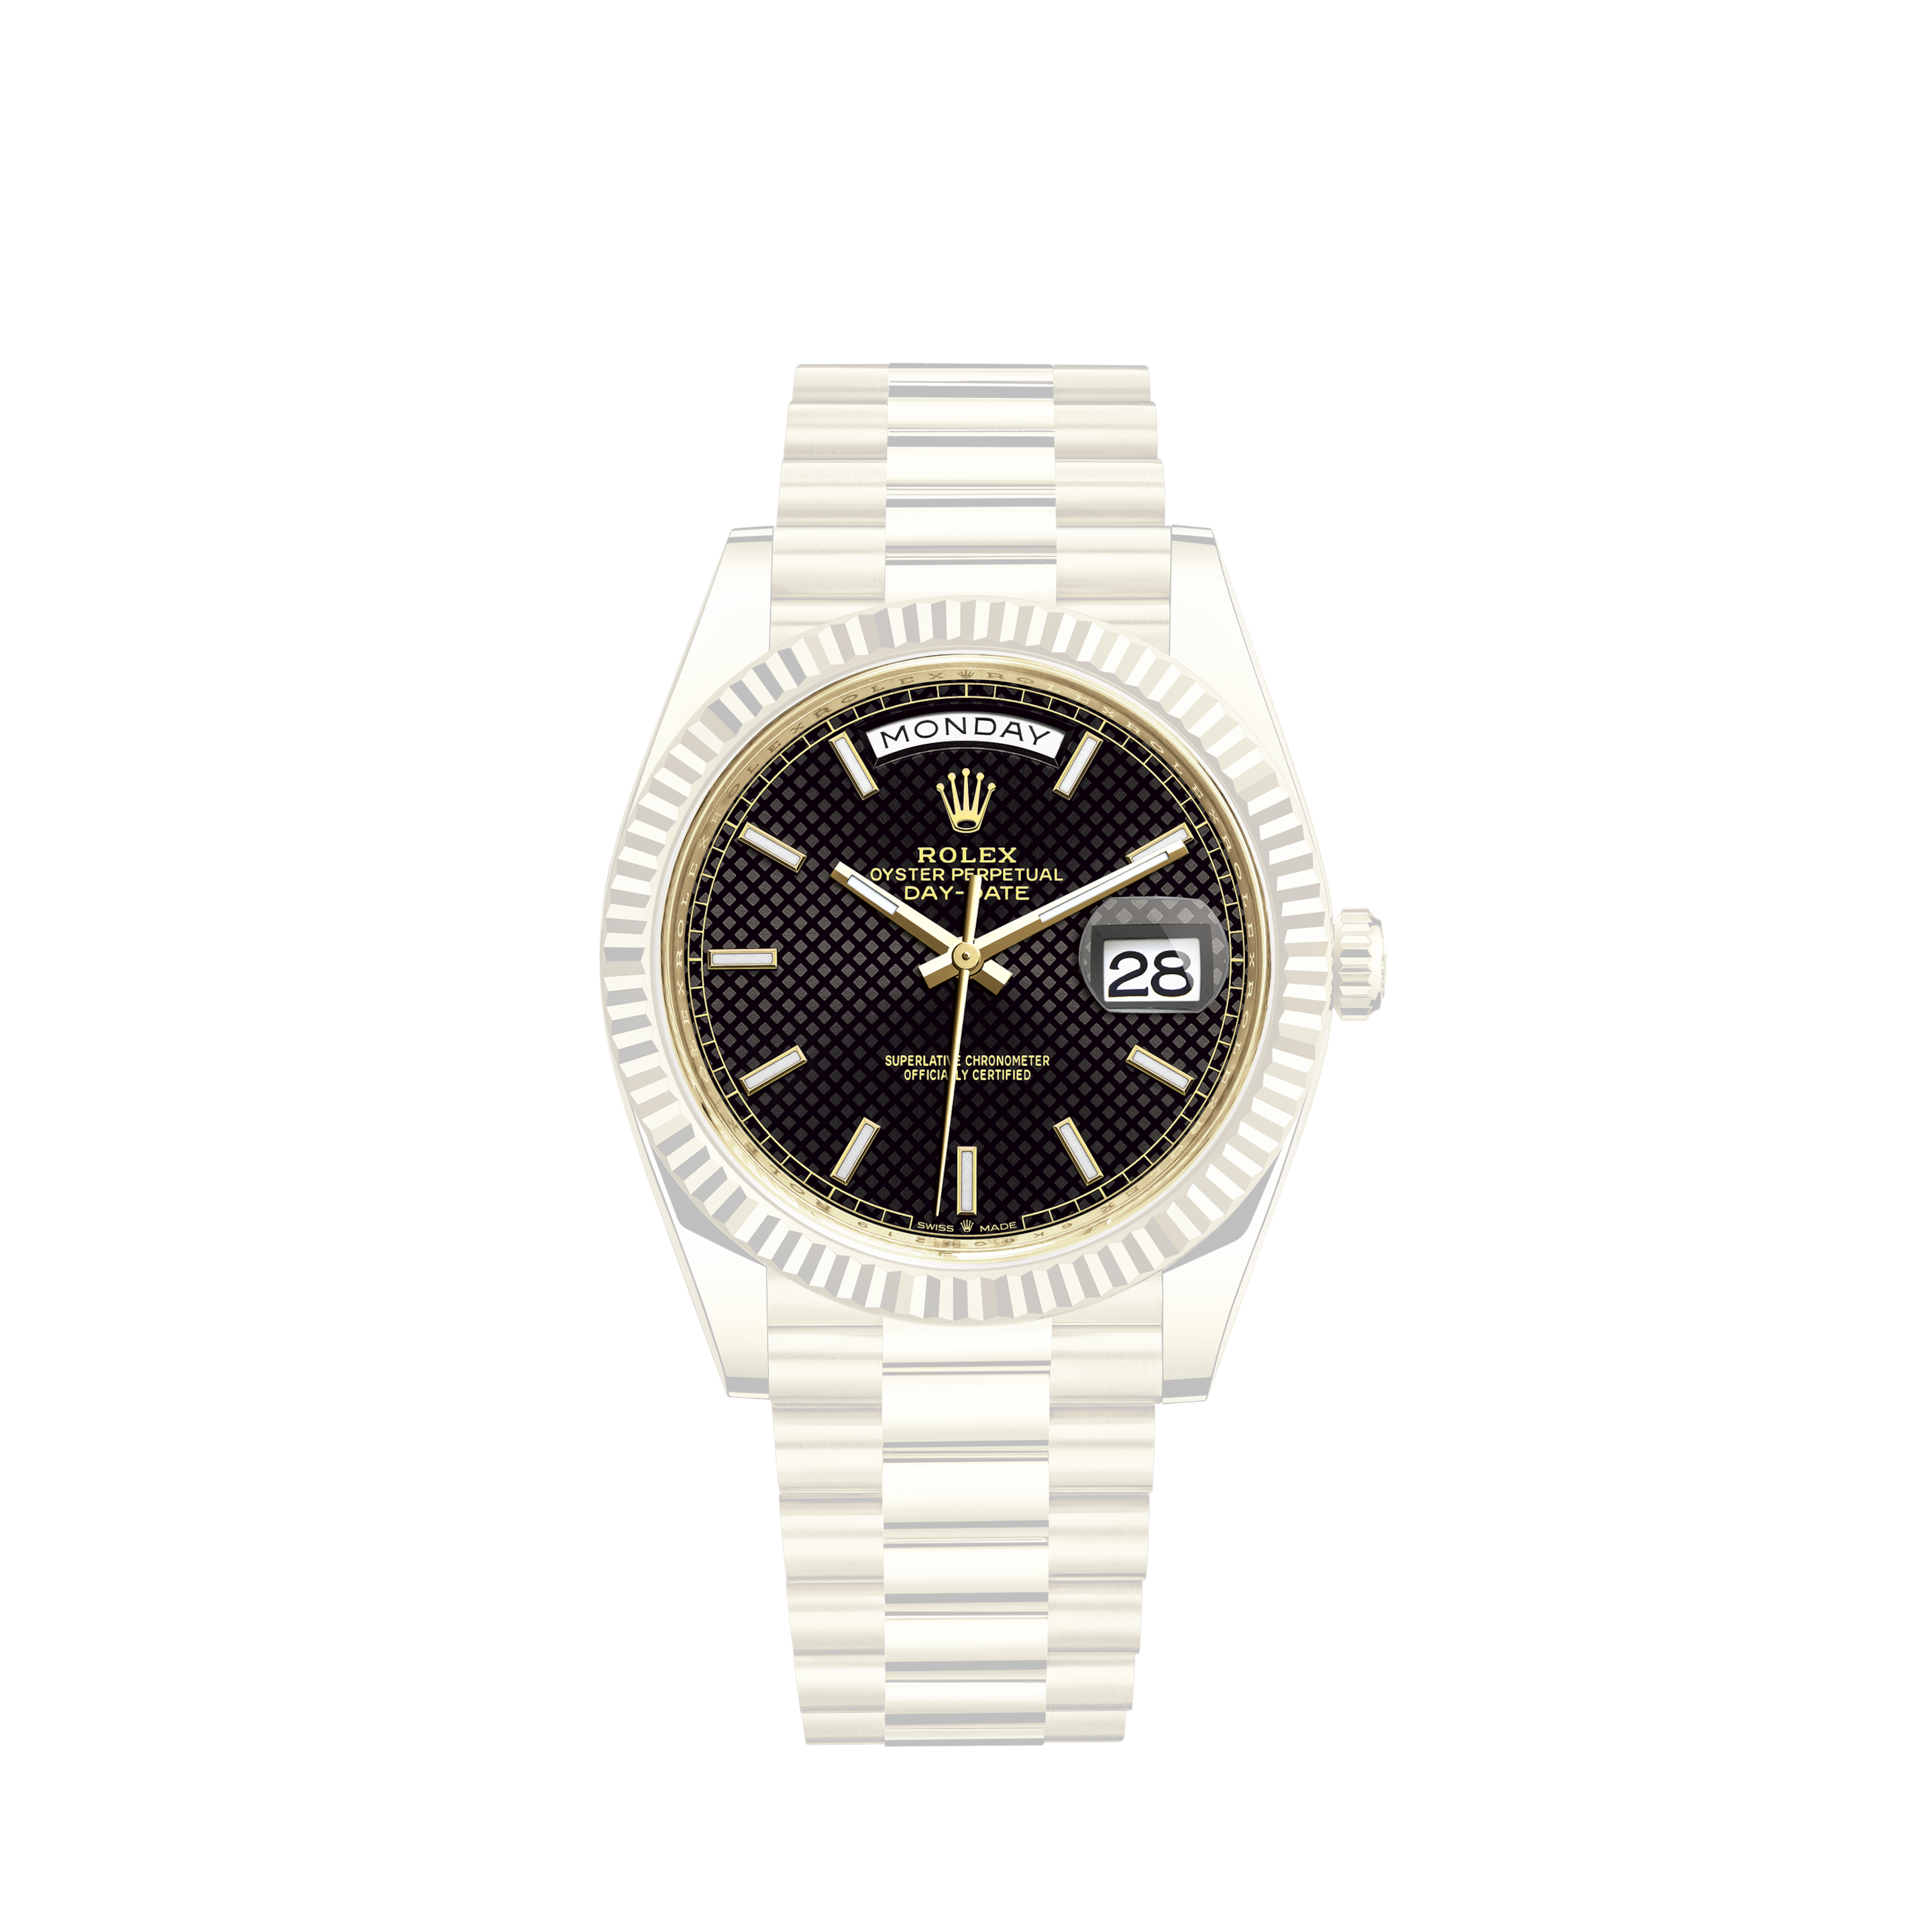 Rolex 36mm Datejust Salmon Dial with Diamond Numbers & Fluted 18k Gold Bezel Wrist Watch